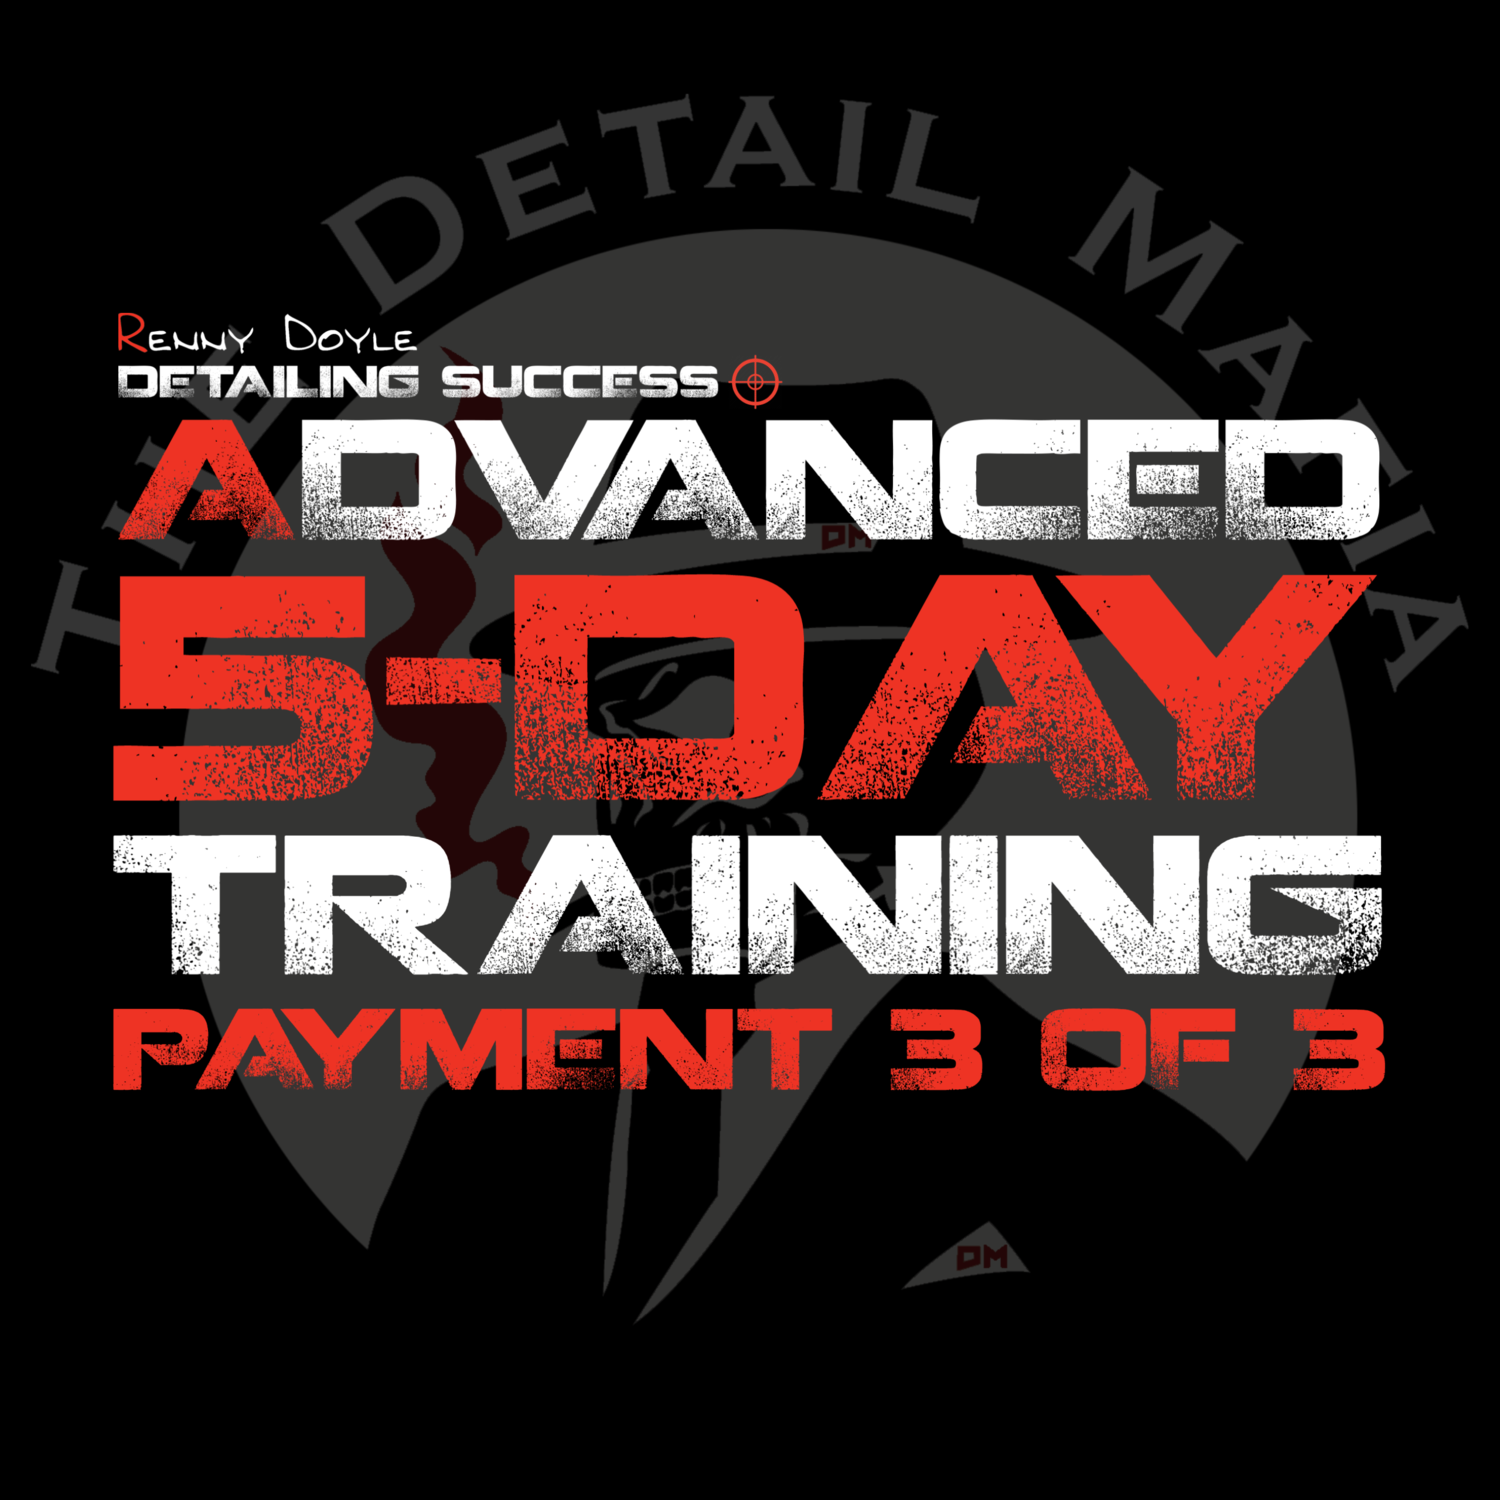 Advanced 5-Day Training 3rd Payment 2021/2022